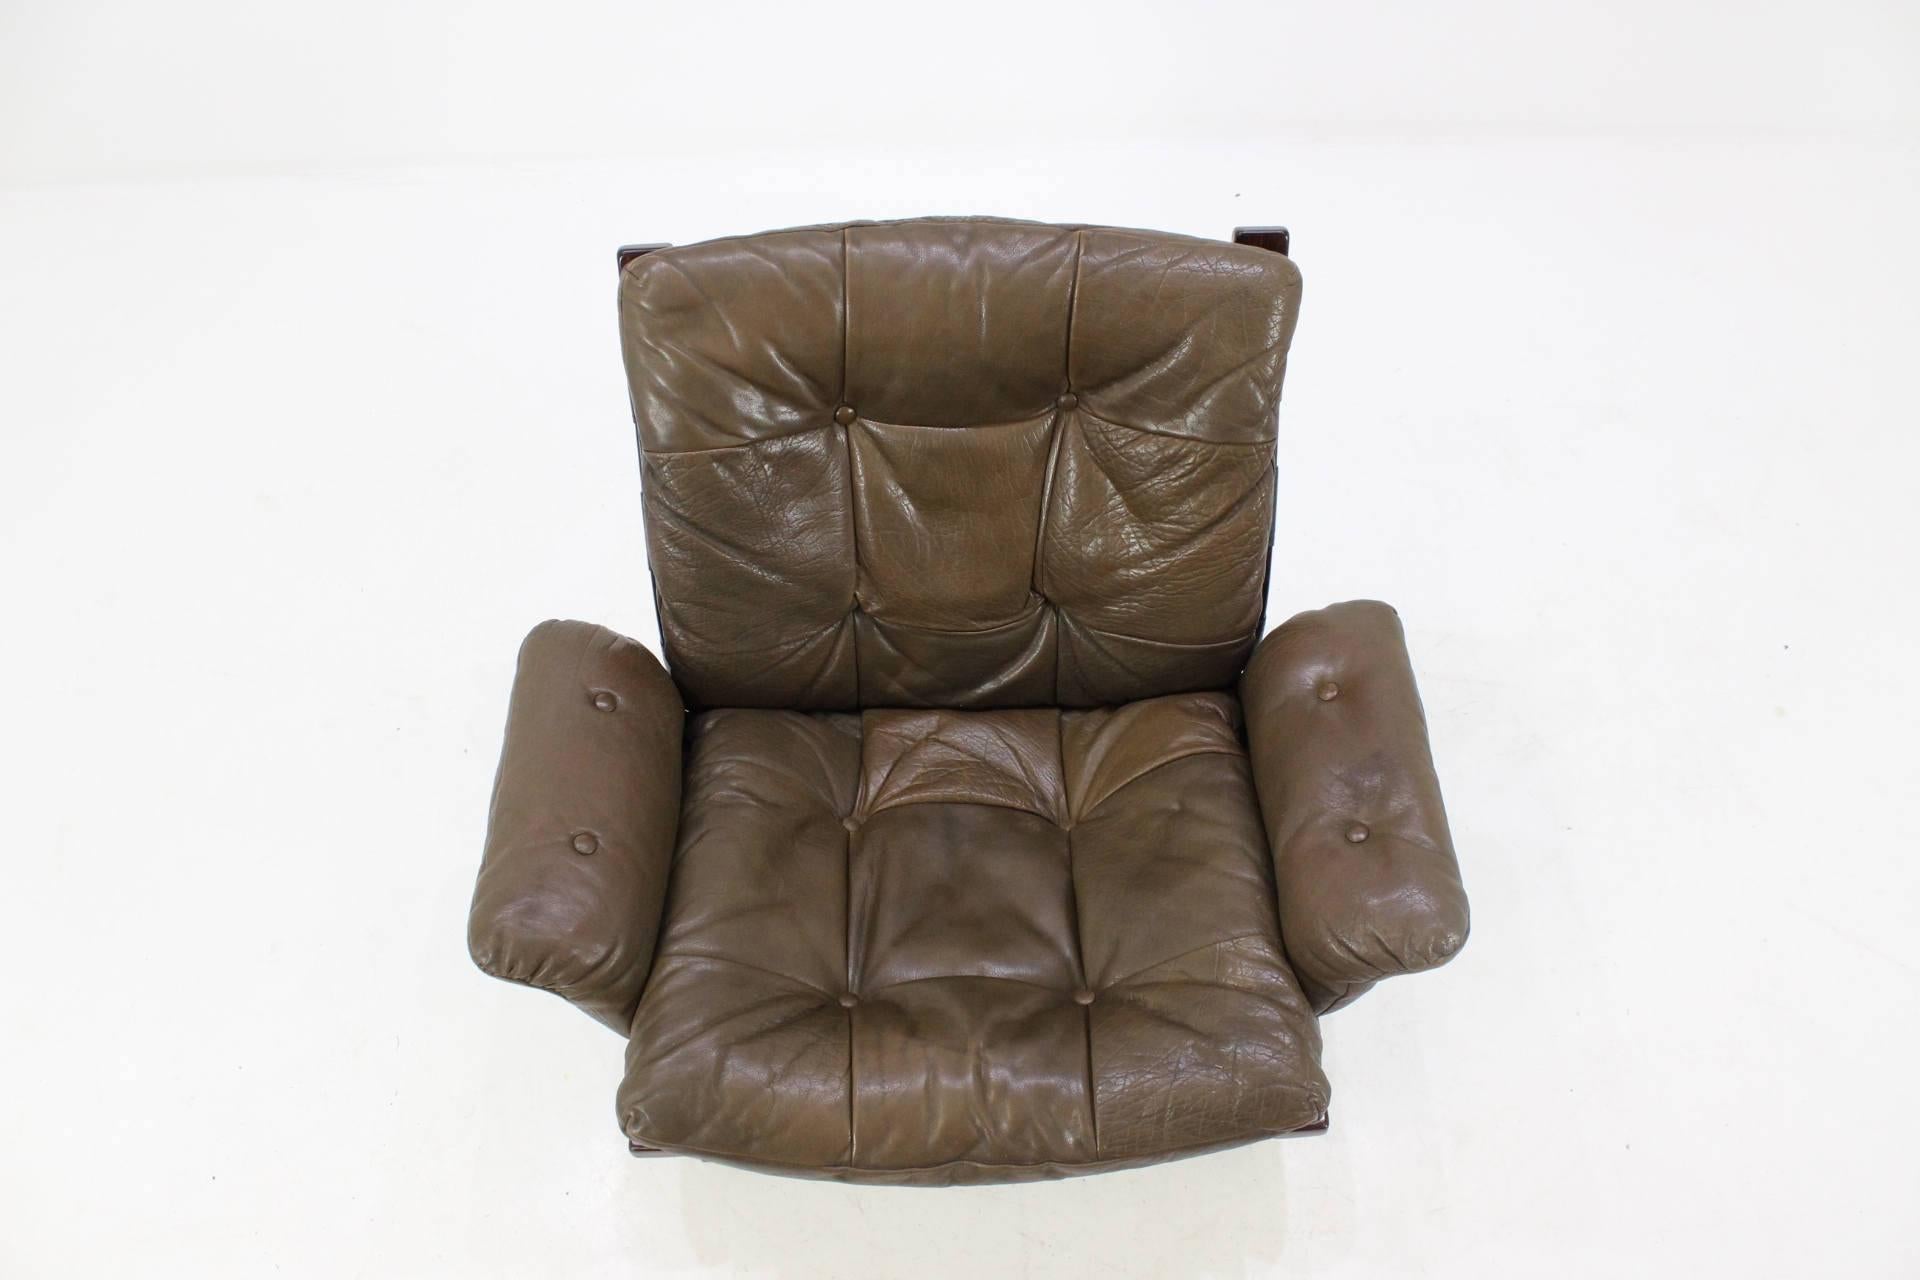 Danish Kengu Leather Chair by Elsa and Nordahl Solheim for O.P. Rykken & Co., 1970s